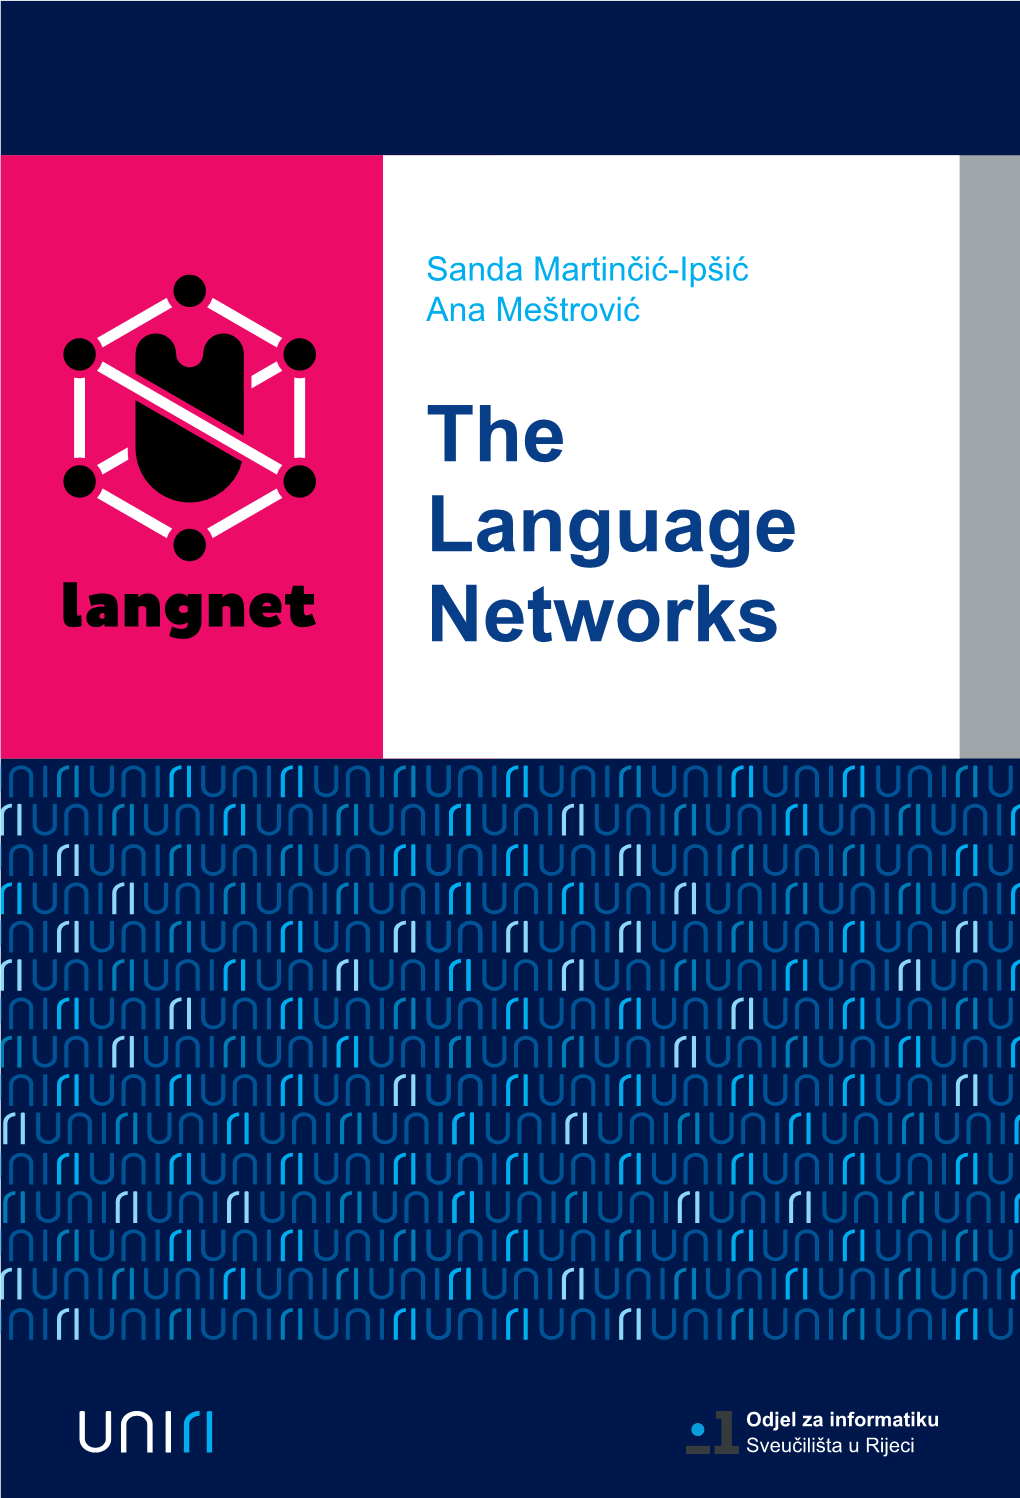 The Language Networks